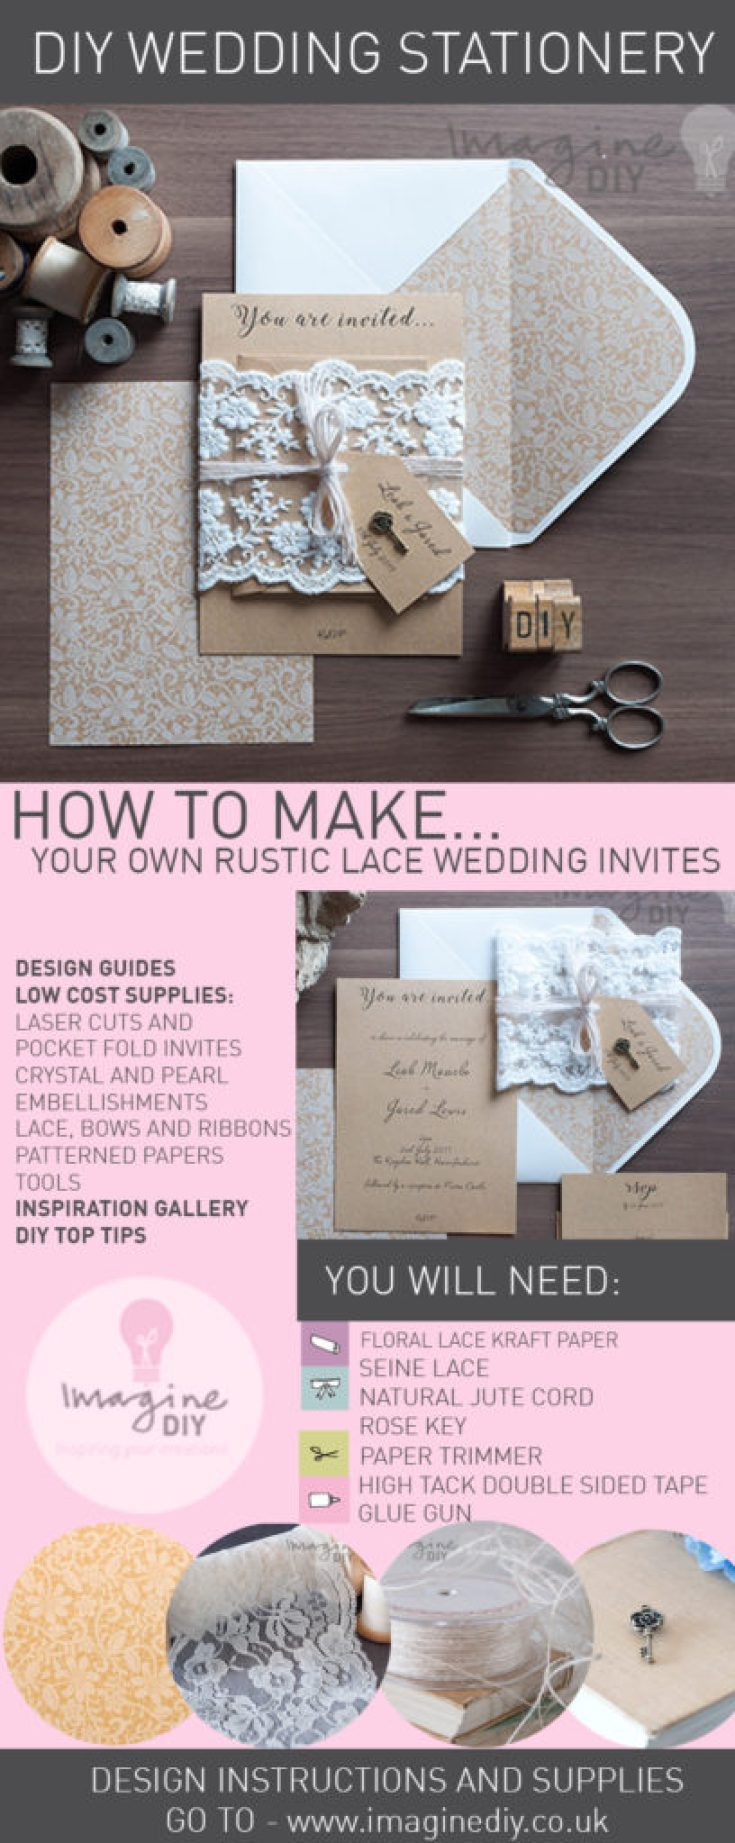 Lace Wedding Invitations DIY
 How to Make Rustic Kraft and Lace Wedding Invitations